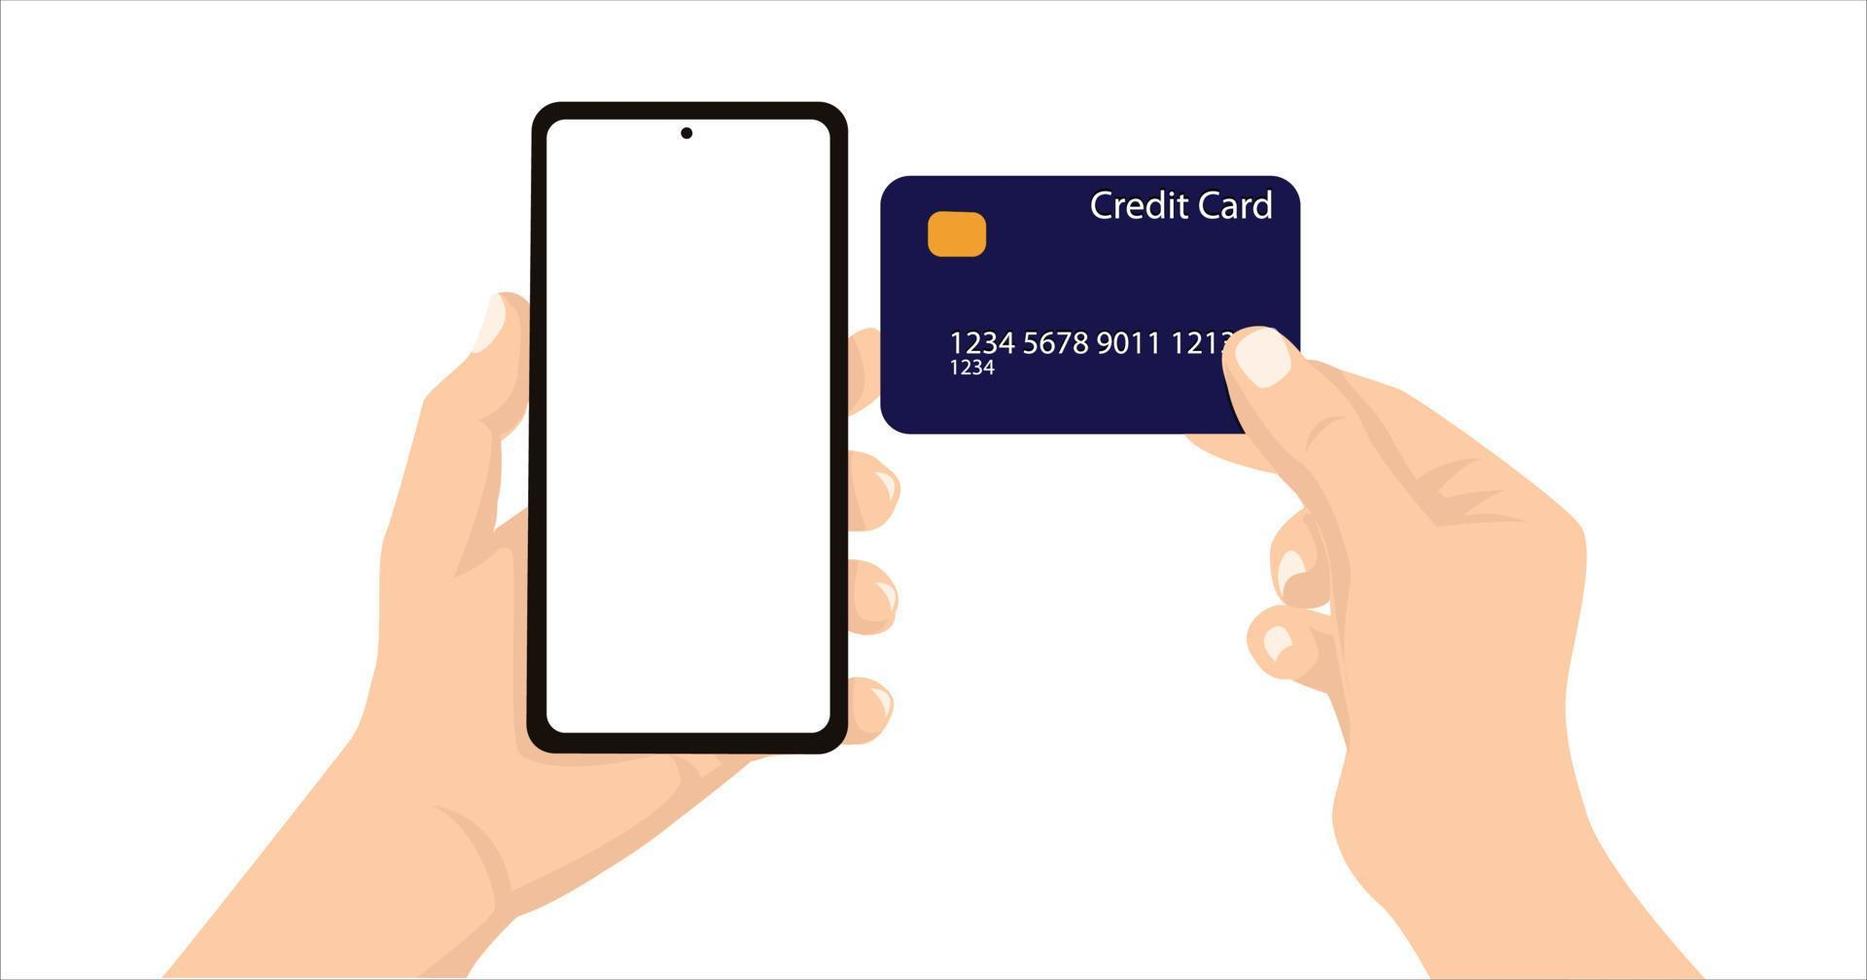 Smartphone in hand with card. Hand Holding smartphone and credit card. Online payment concept. Man Holding Credit Card and Phone Checking Account Balance. Online mobile banking and payment. vector